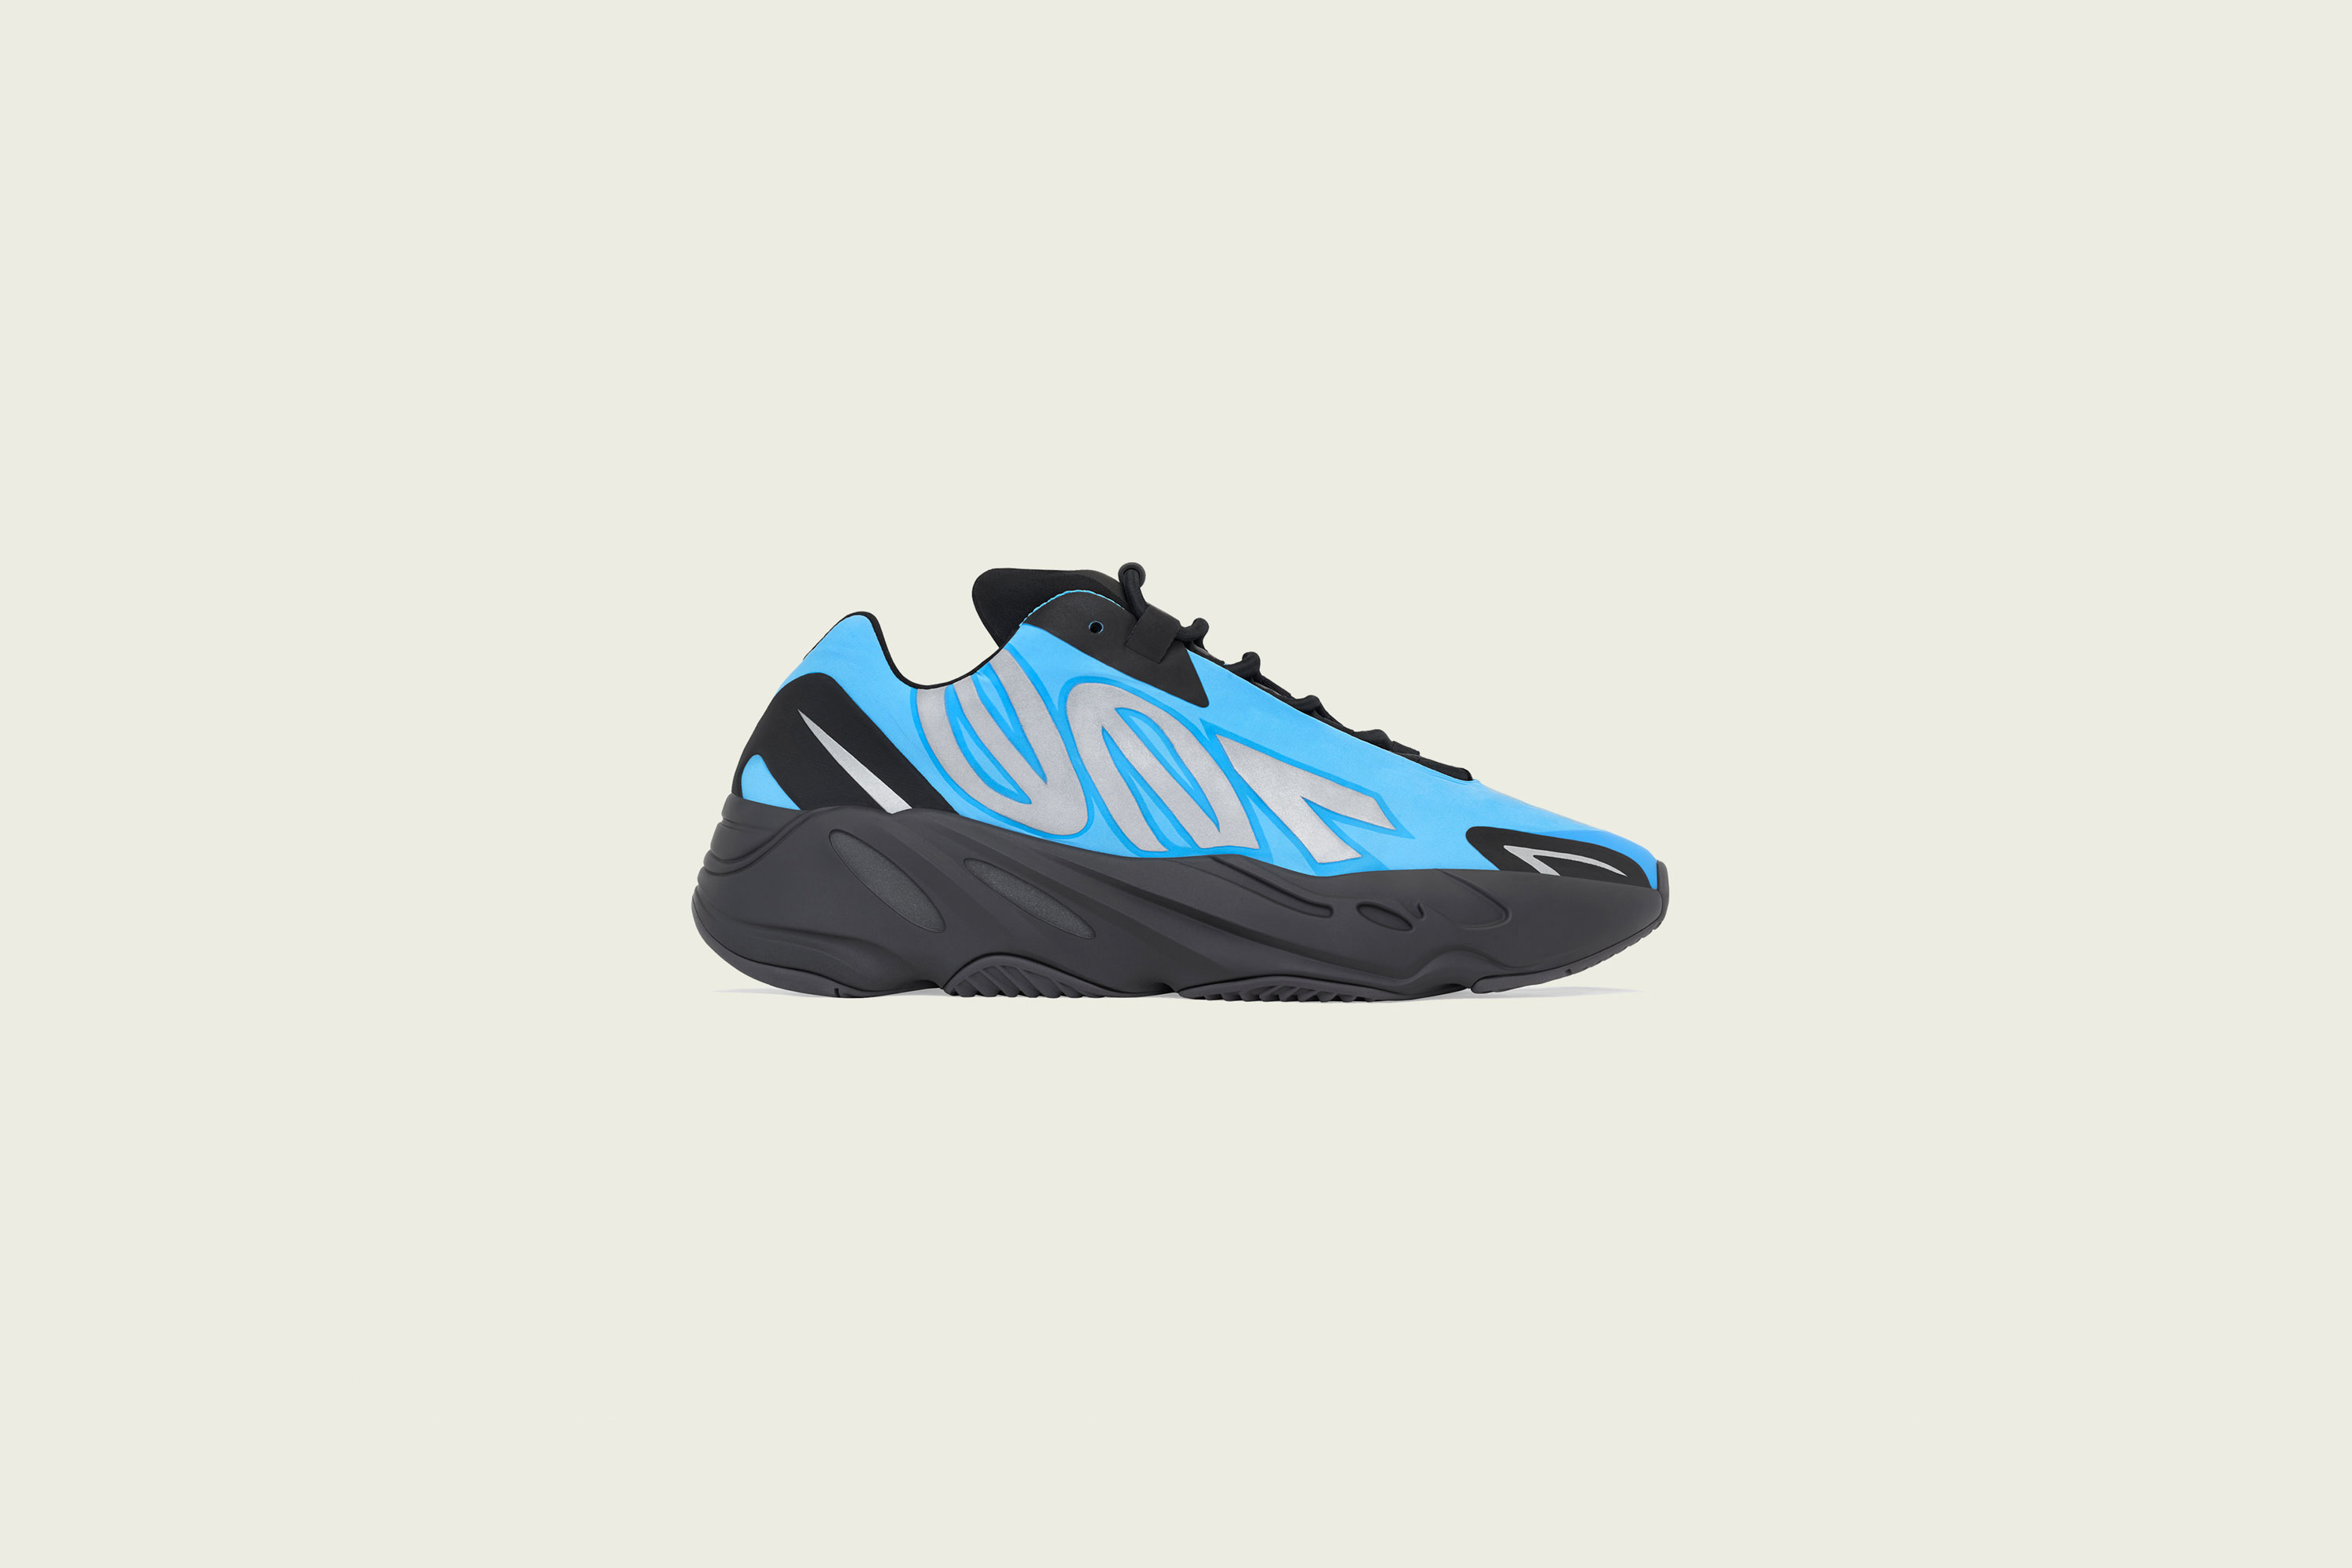 Up There Launches - adidas Originals Yeezy 700 MNVN 'Bright Cyan'